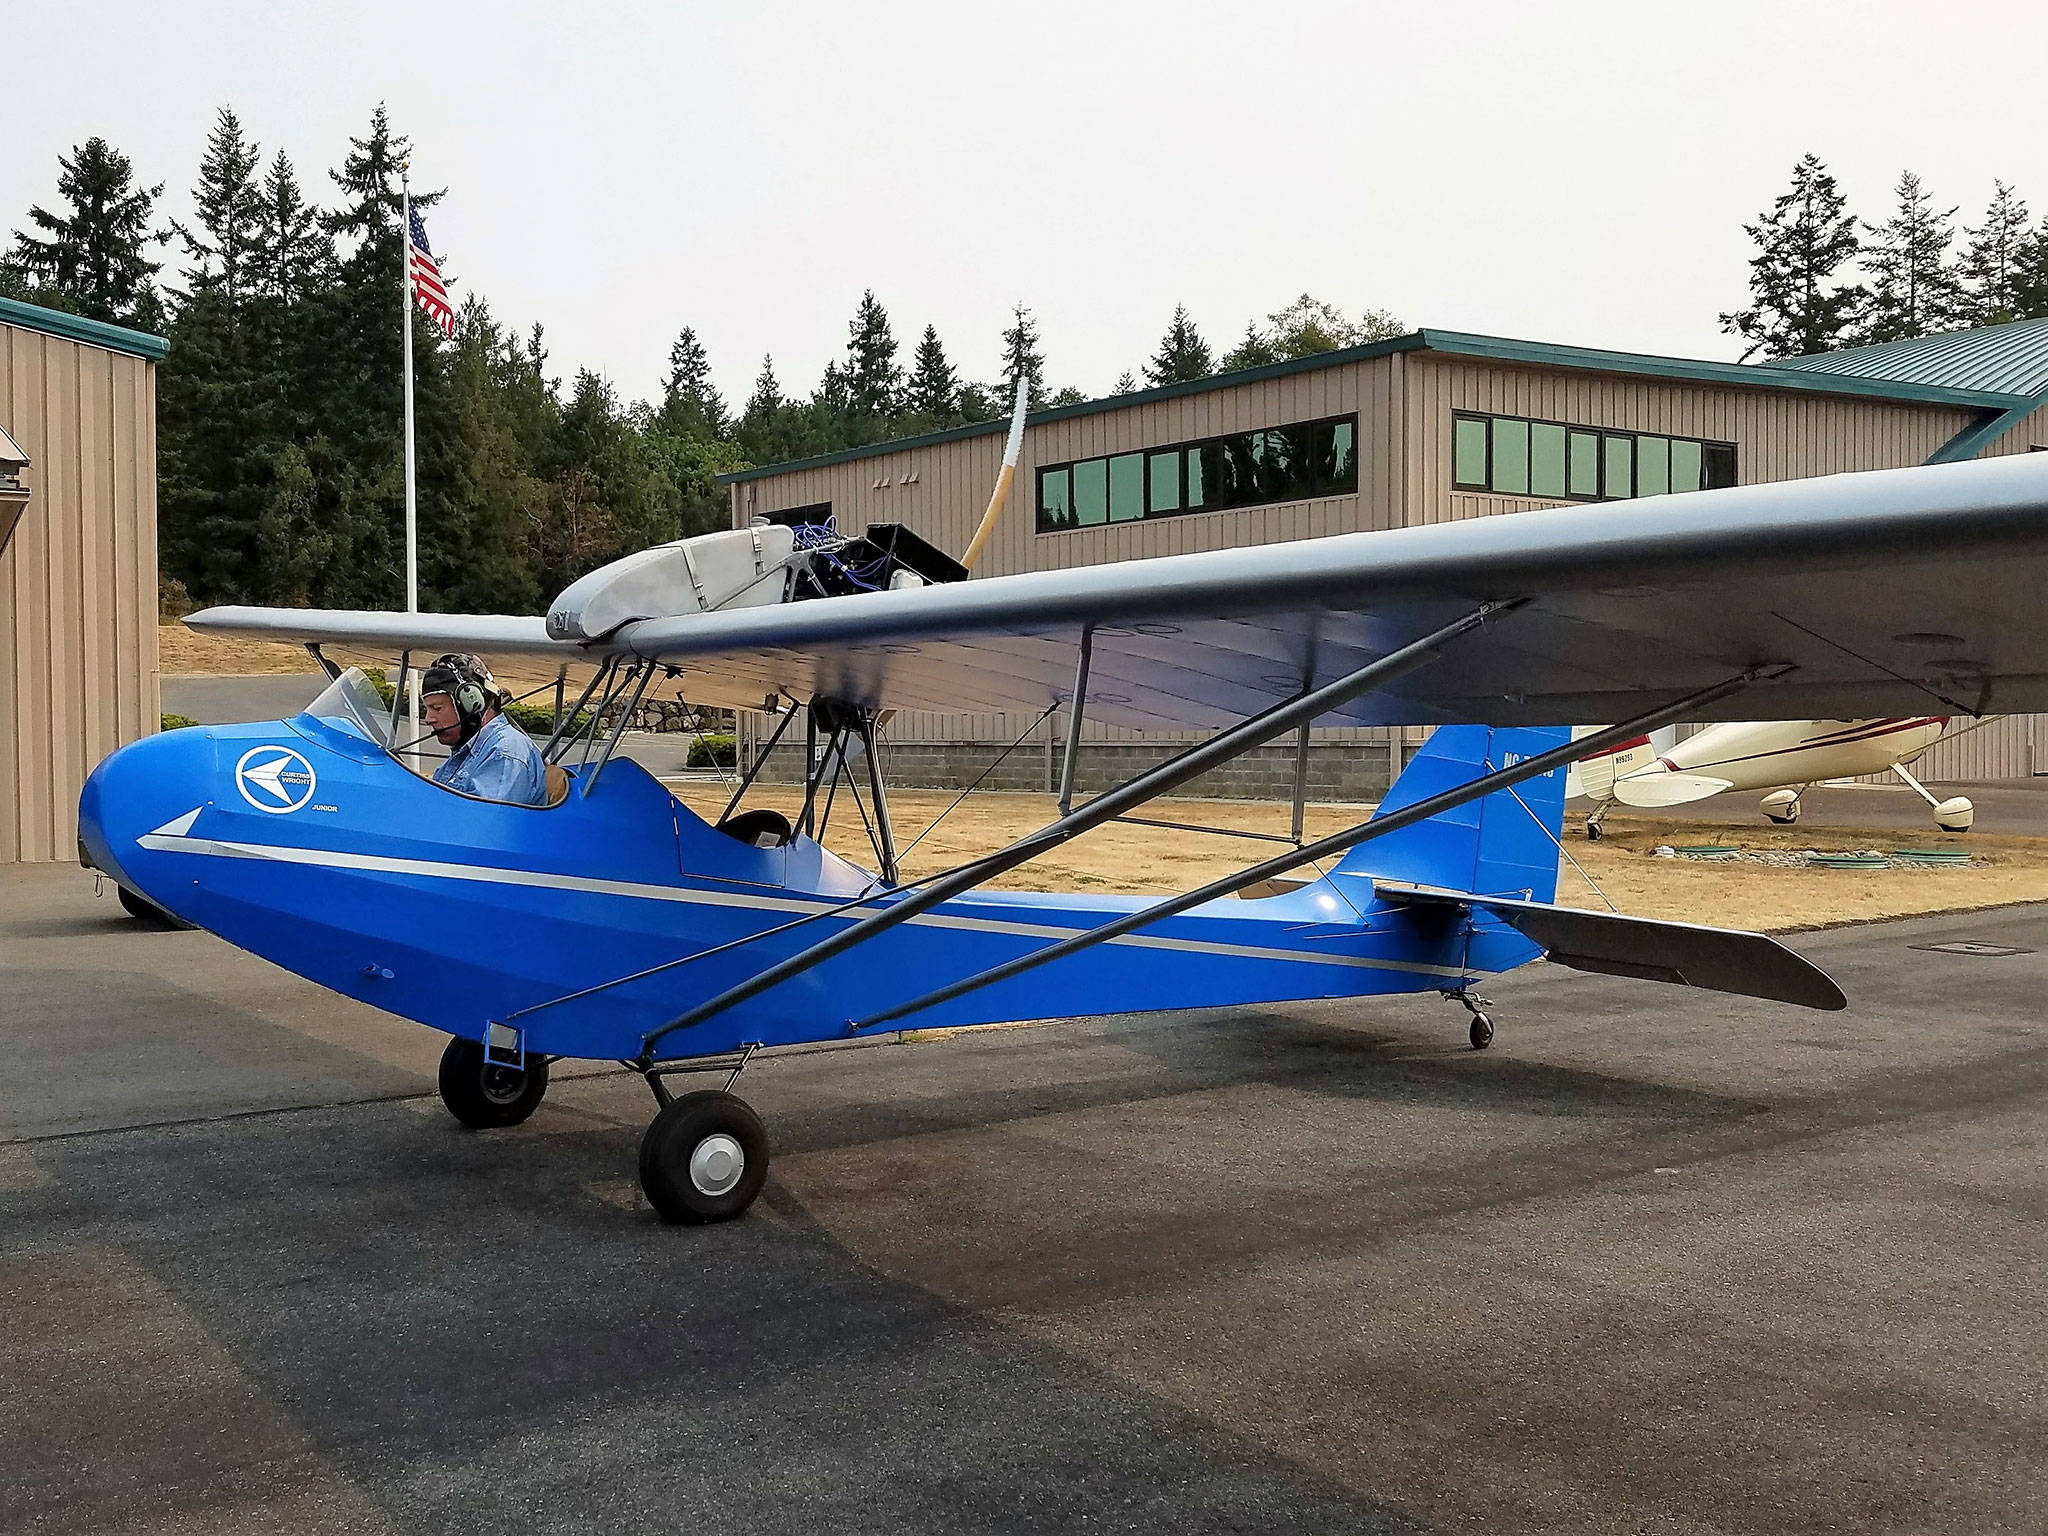 Organizers of the Port Townsend Aero Museum plan to bring some antique planes to Sequim’s Olympic Peninsula Air Affaire and Sequim Valley Fly-In this weekend including a Curtiss Wright Jr. replica. Photo courtesy of Michael Payne